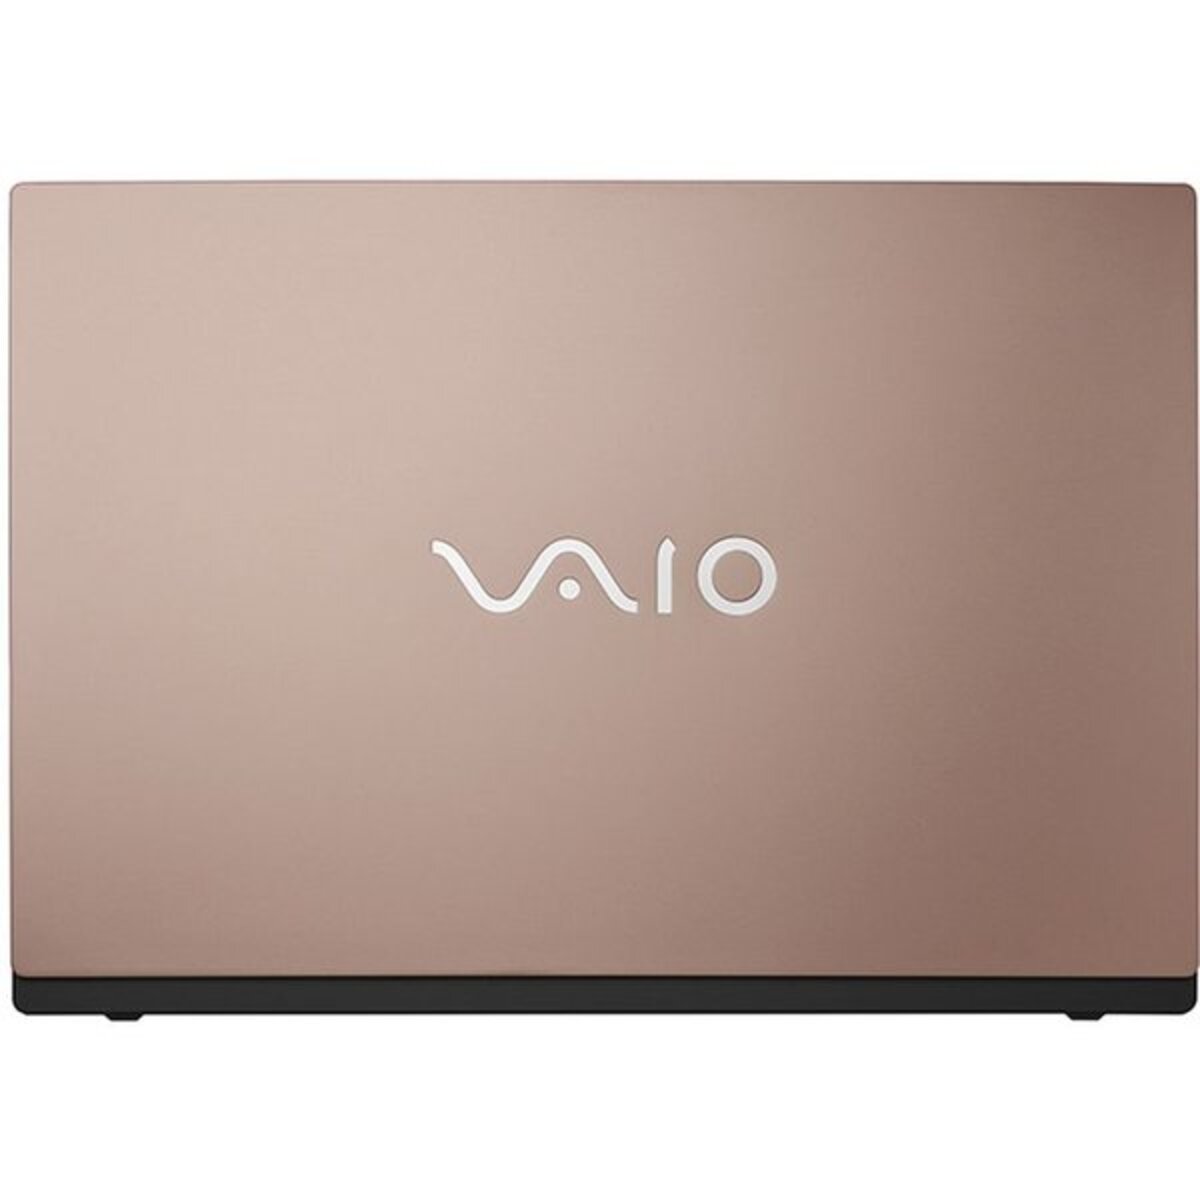 Vaio NP14V3ME010P SE14 Laptop,Core i7-1165G7,8GB RAM,512GB SSD,Shared Graphics,Windows 10,FHD 14inch,Red Copper,English-Arabic Keyboard